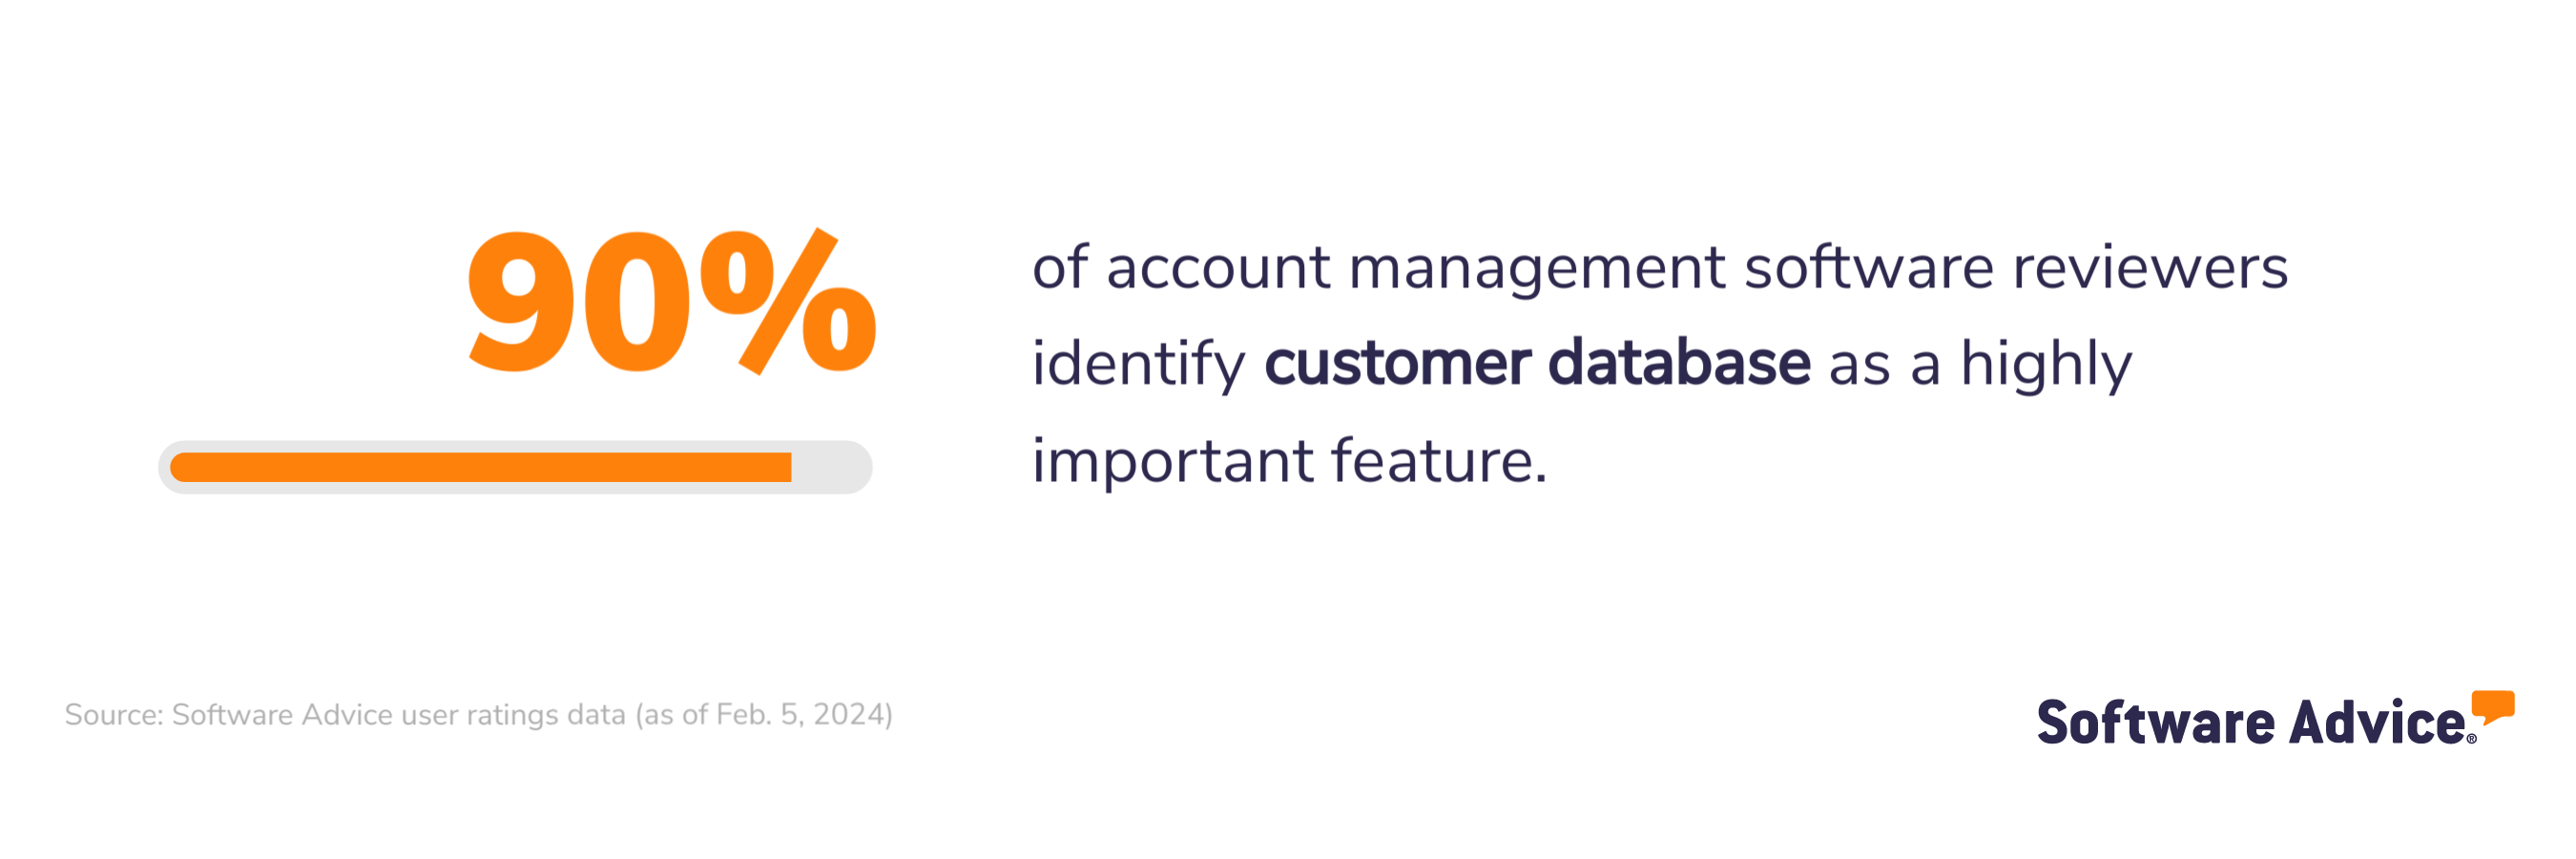 Customer database feature of account management software